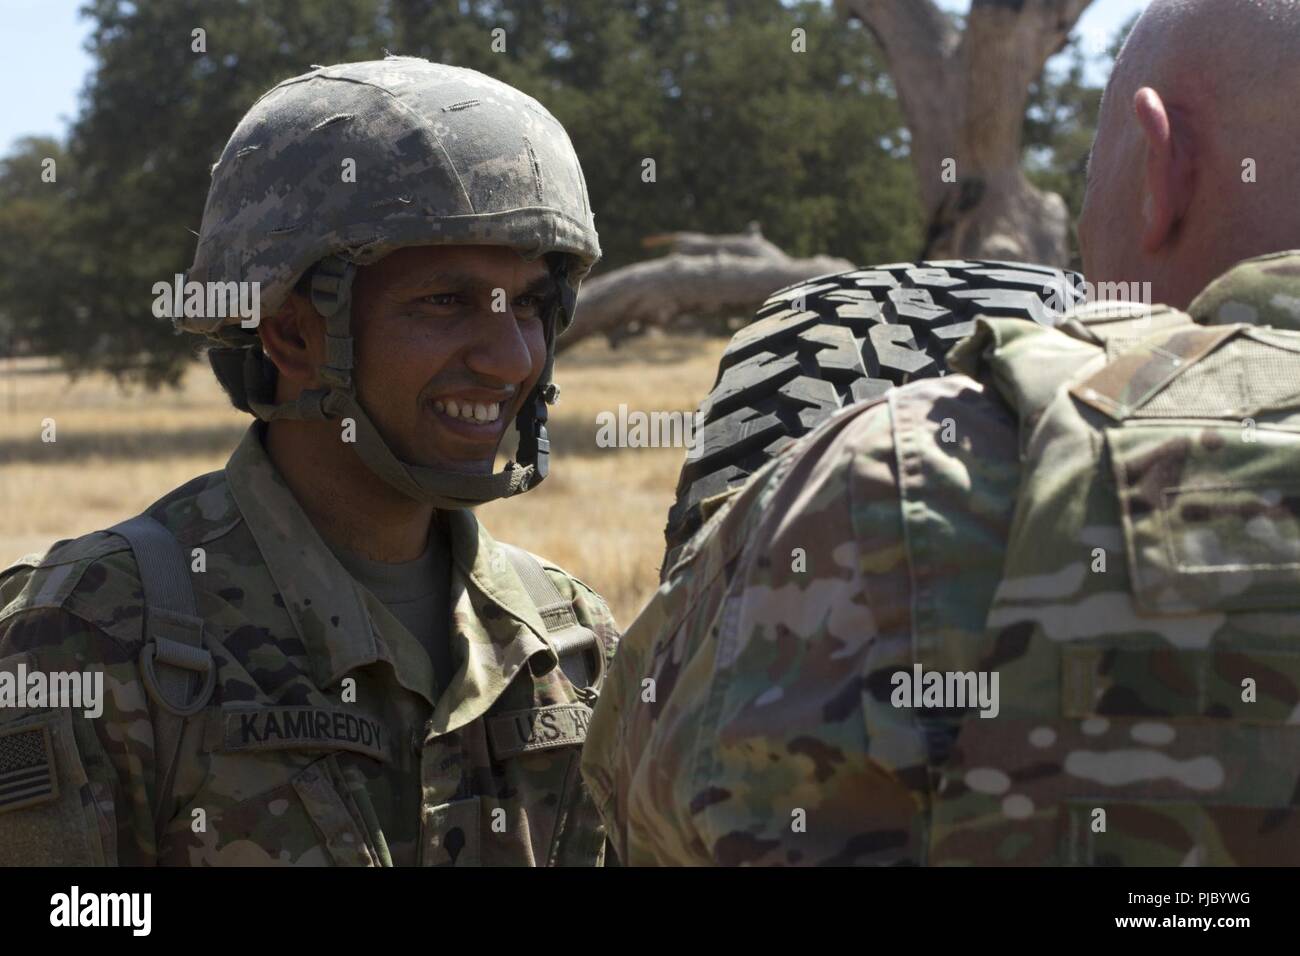 FORT HUNTER LIGGETT-- U.S. Army Reserve Lt. Gen. Charles D. Luckey (right) speaks with Spc. Srinivas Kamireddy while visiting training sites during the 91st Training Division's Combat Support Training Exercise on Ft. Hunter Liggett, California, July 17, 2018. The CSTX 91-18-01 ensures America’s Army Reserve units are trained to deploy bringing capable, combat-ready, and lethal firepower in support of the Army and our joint partners anywhere in the world. Stock Photo